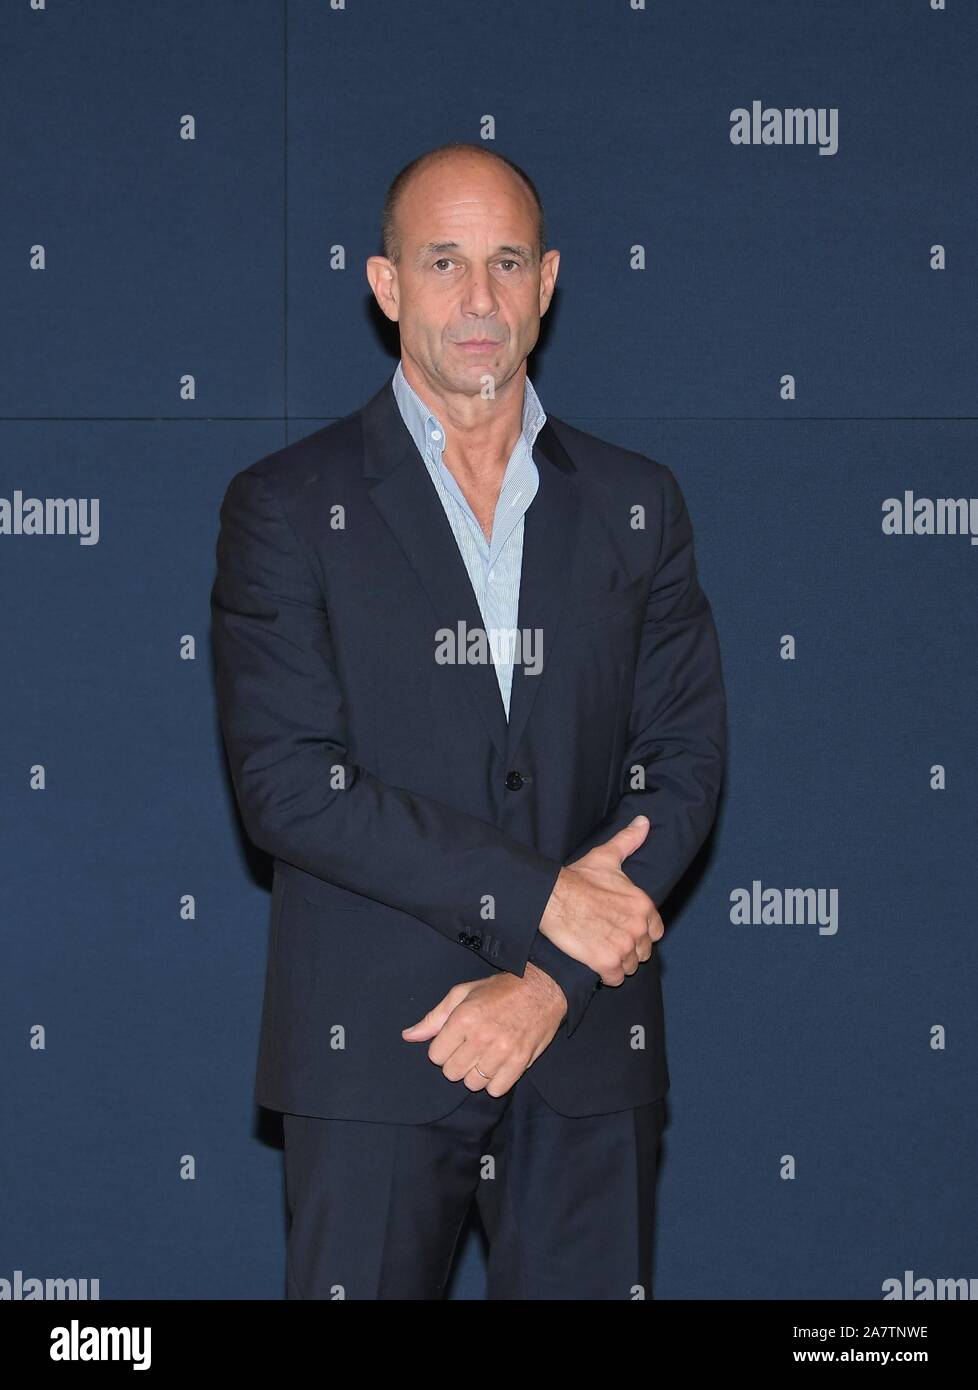 Milan, Italy. 21st Oct, 2019. Milan, IBM Studios FASHION GLOBAL SUMMIT 2019 guest speakers. In picture: Massimo Piombini CEO Balmain Credit: Independent Photo Agency/Alamy Live News Stock Photo -